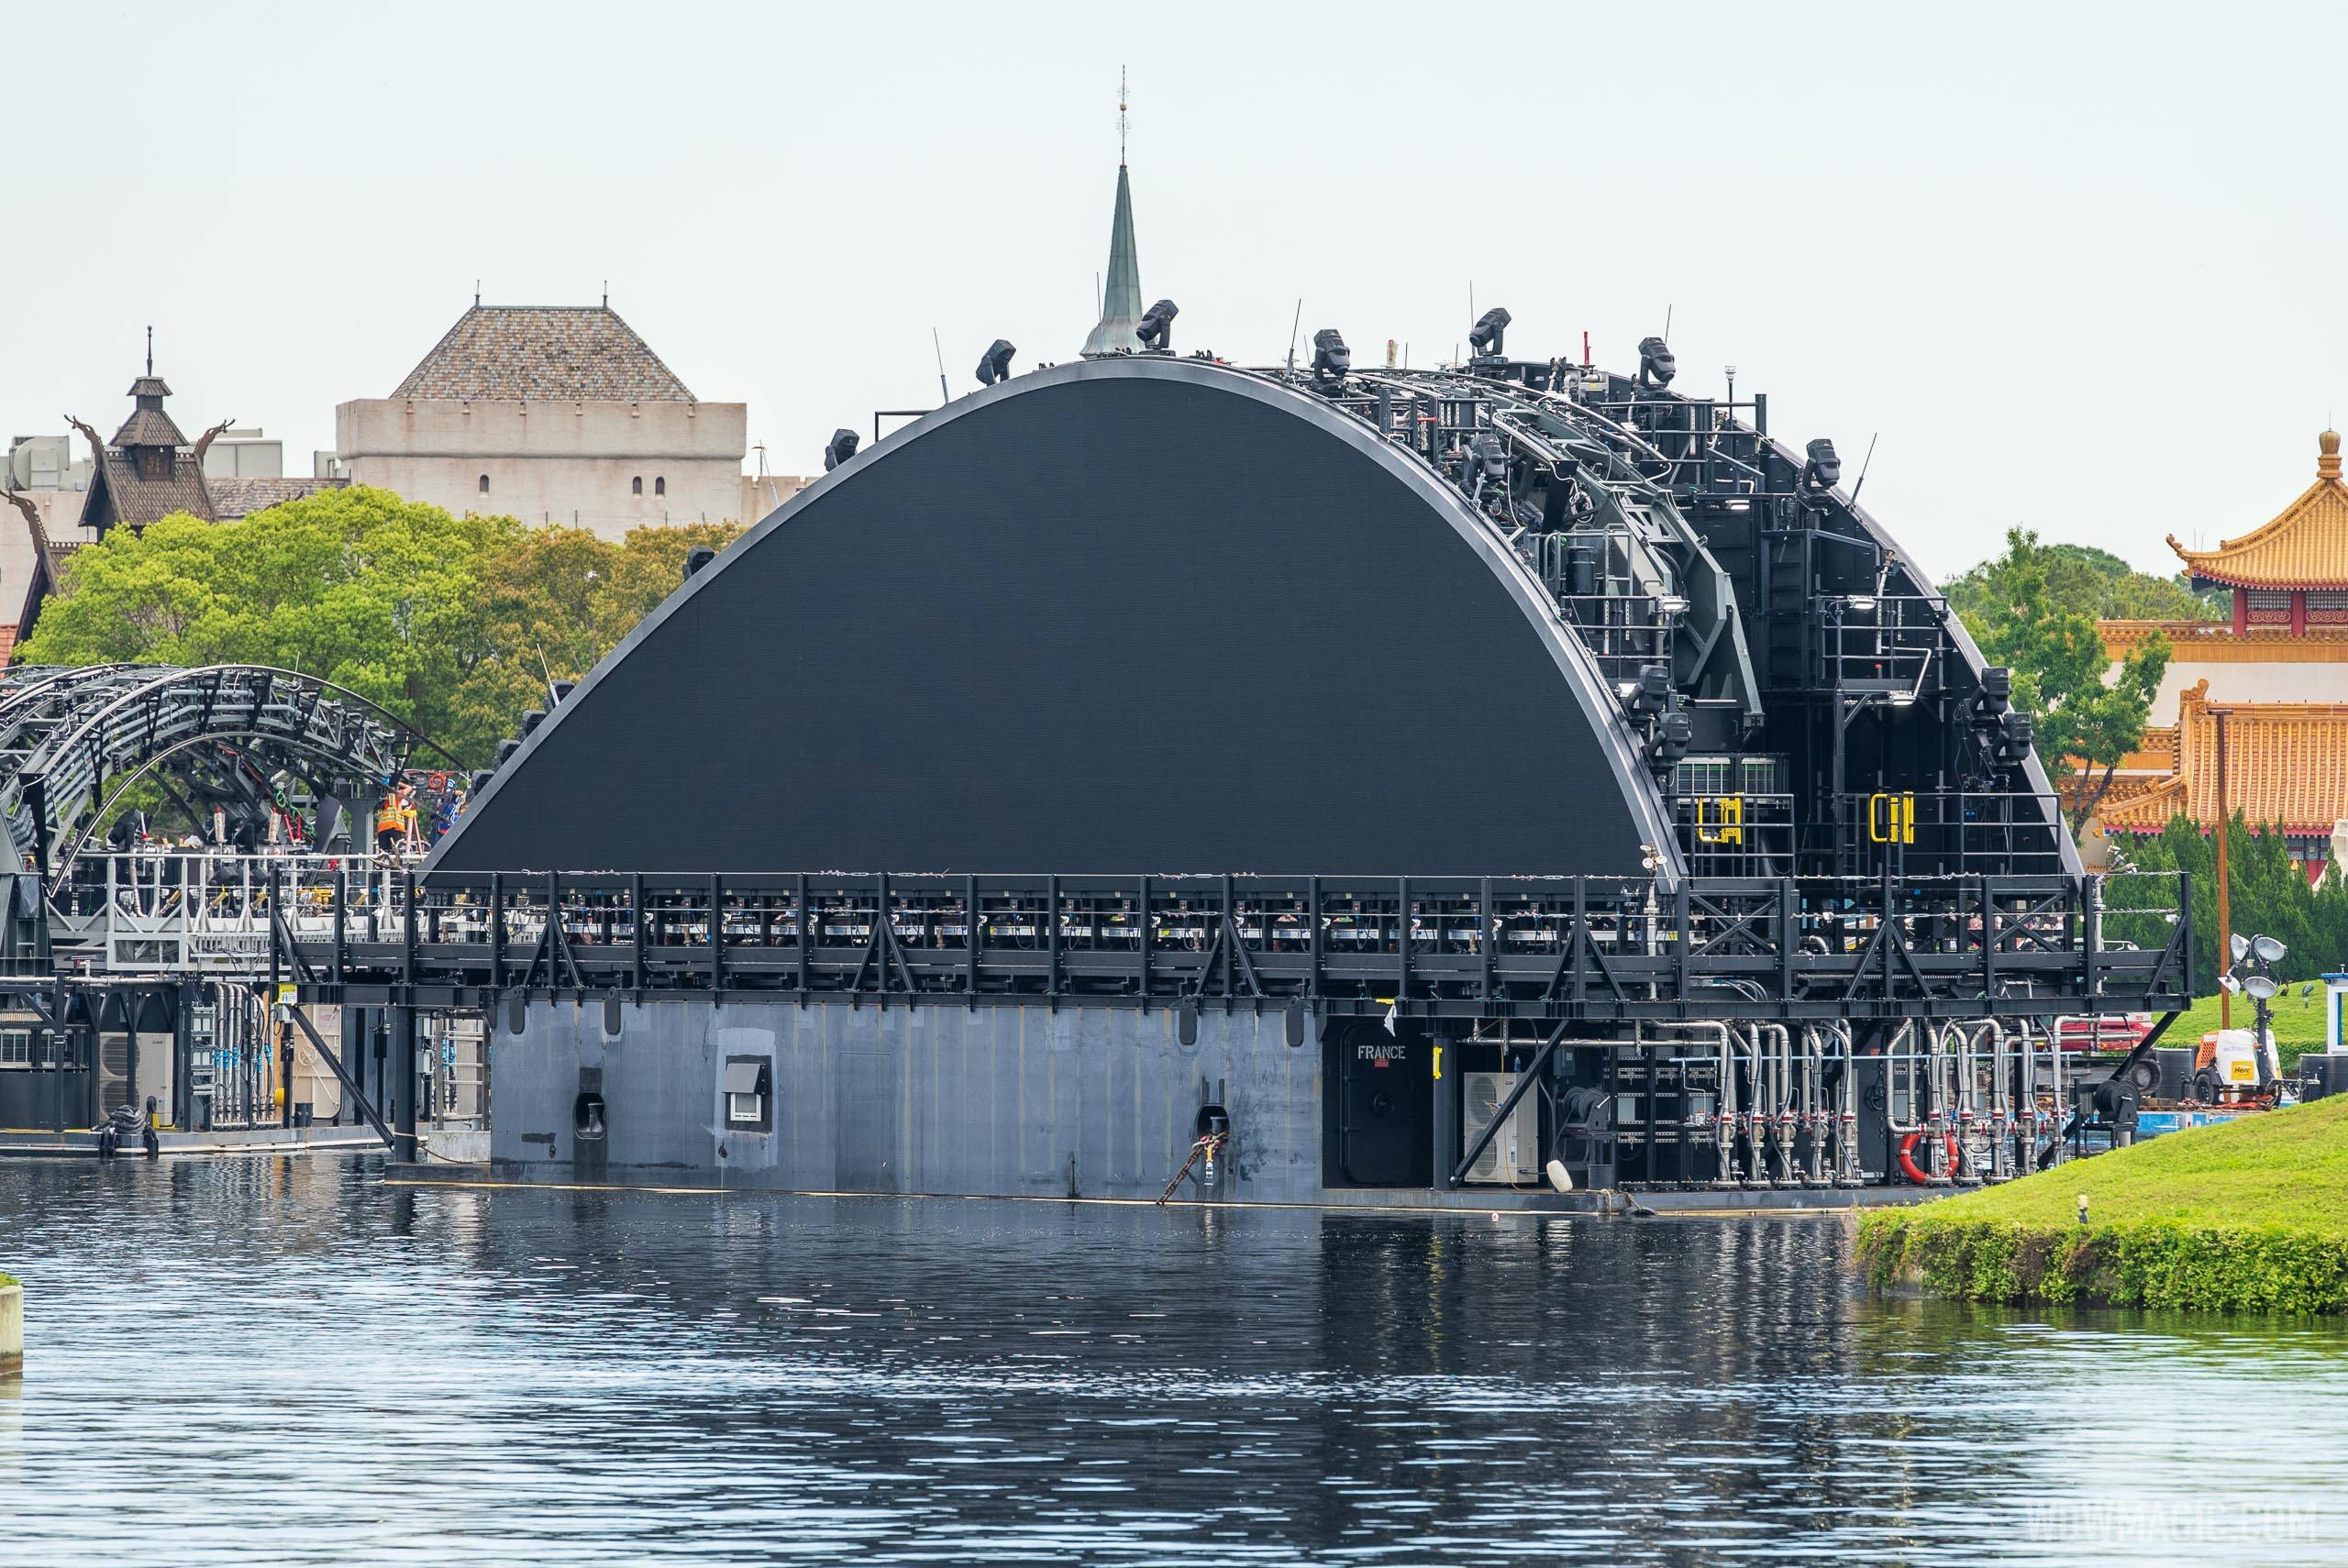 Third Harmonious fin barge (France) in position